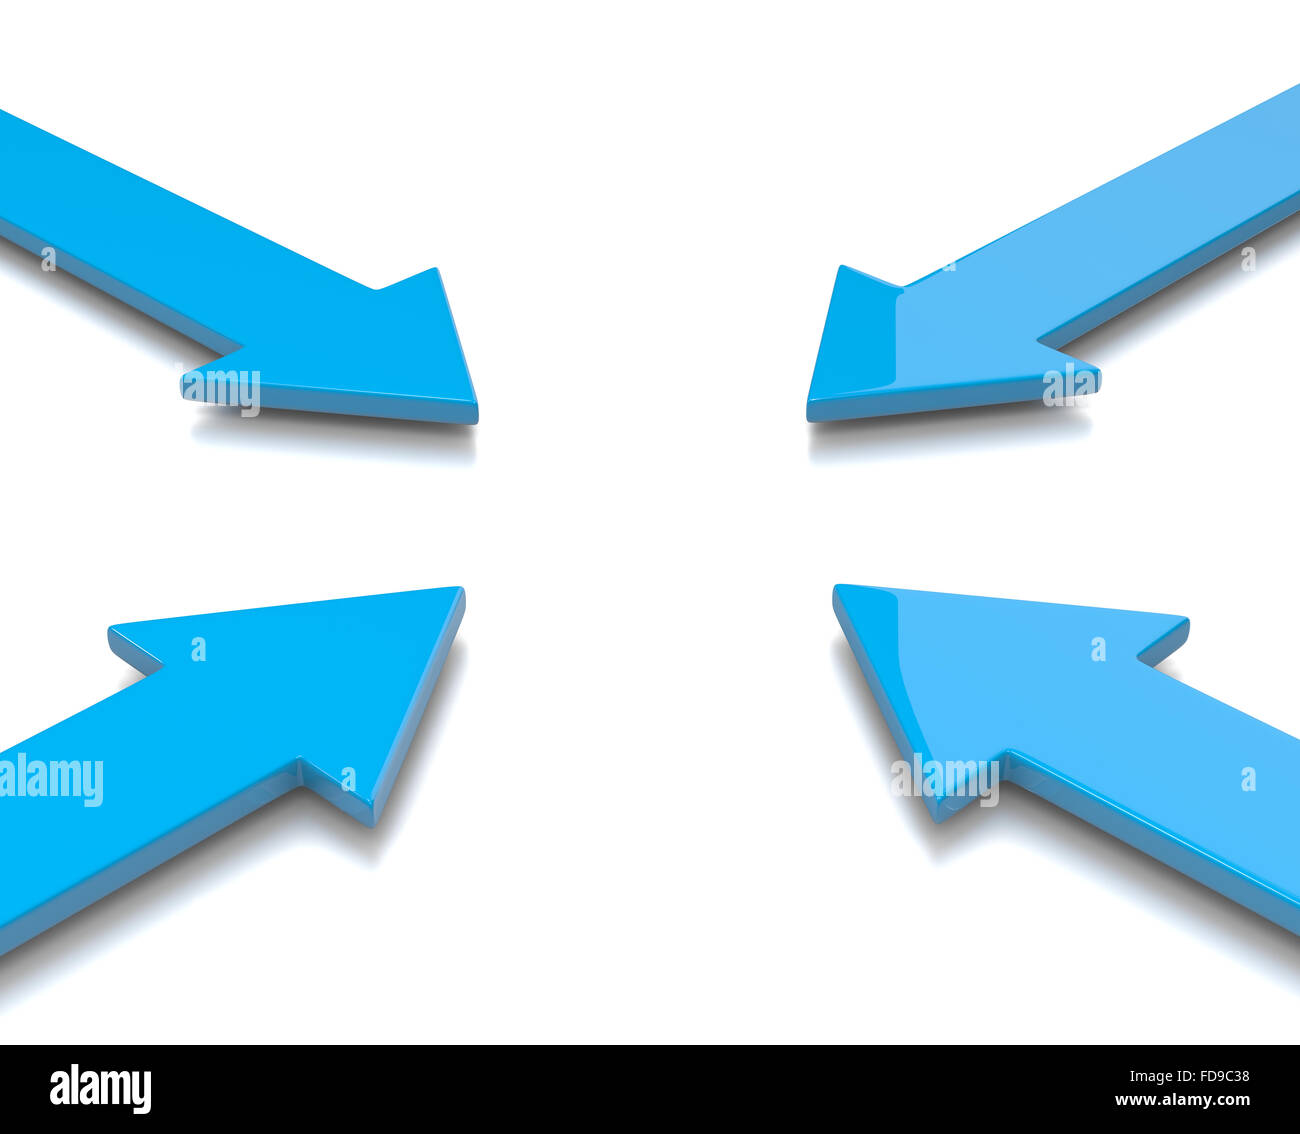 Four Blue Convergent Arrows 3D Illustration on White Background Stock Photo